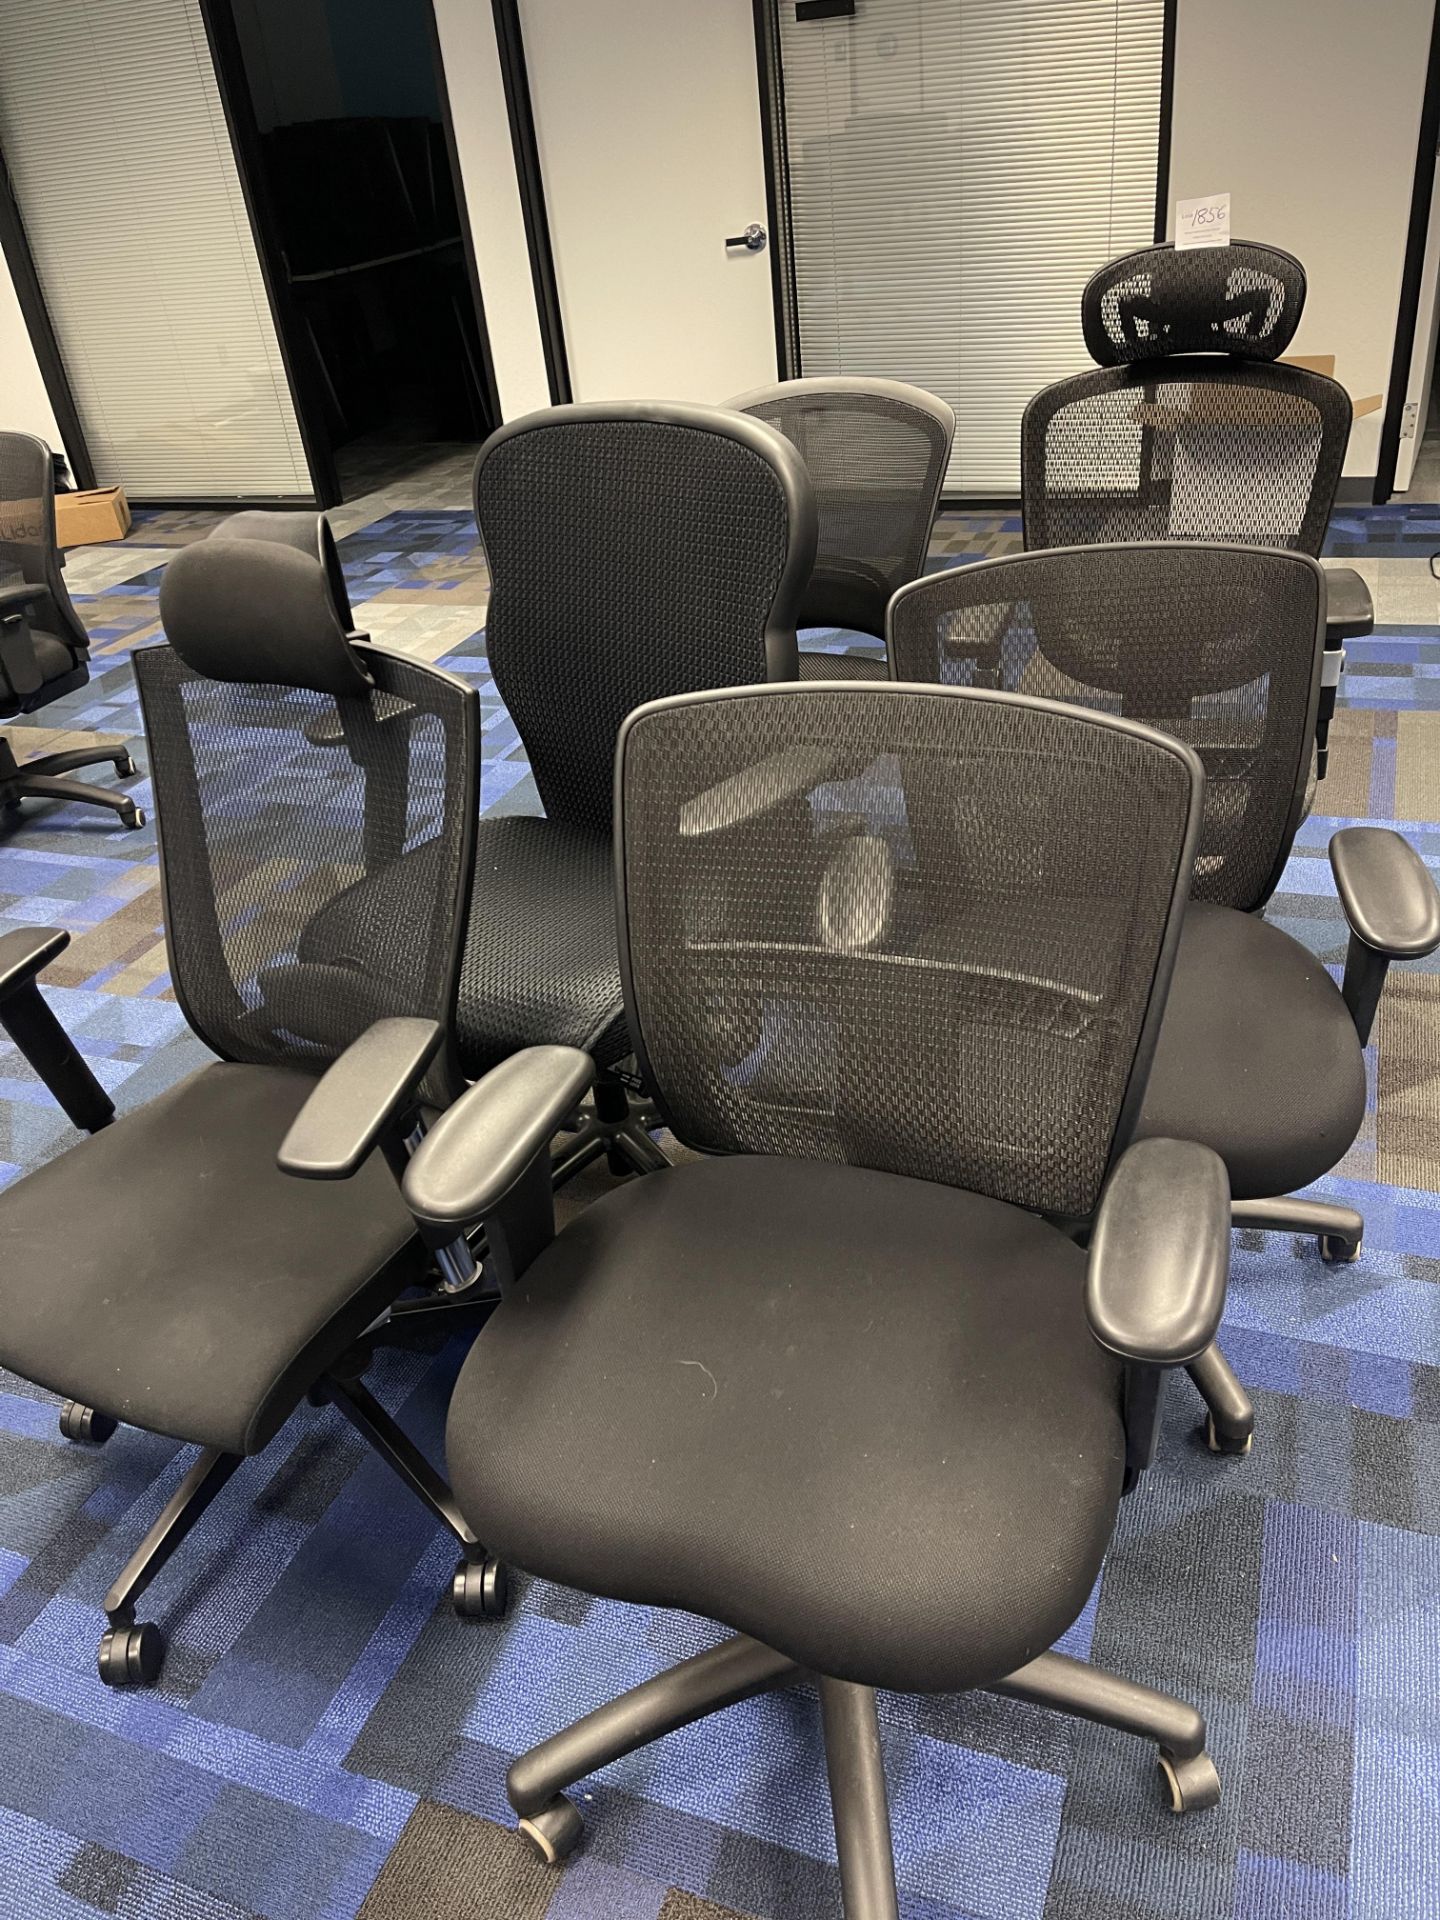 Six Black Desk Chairs with arms